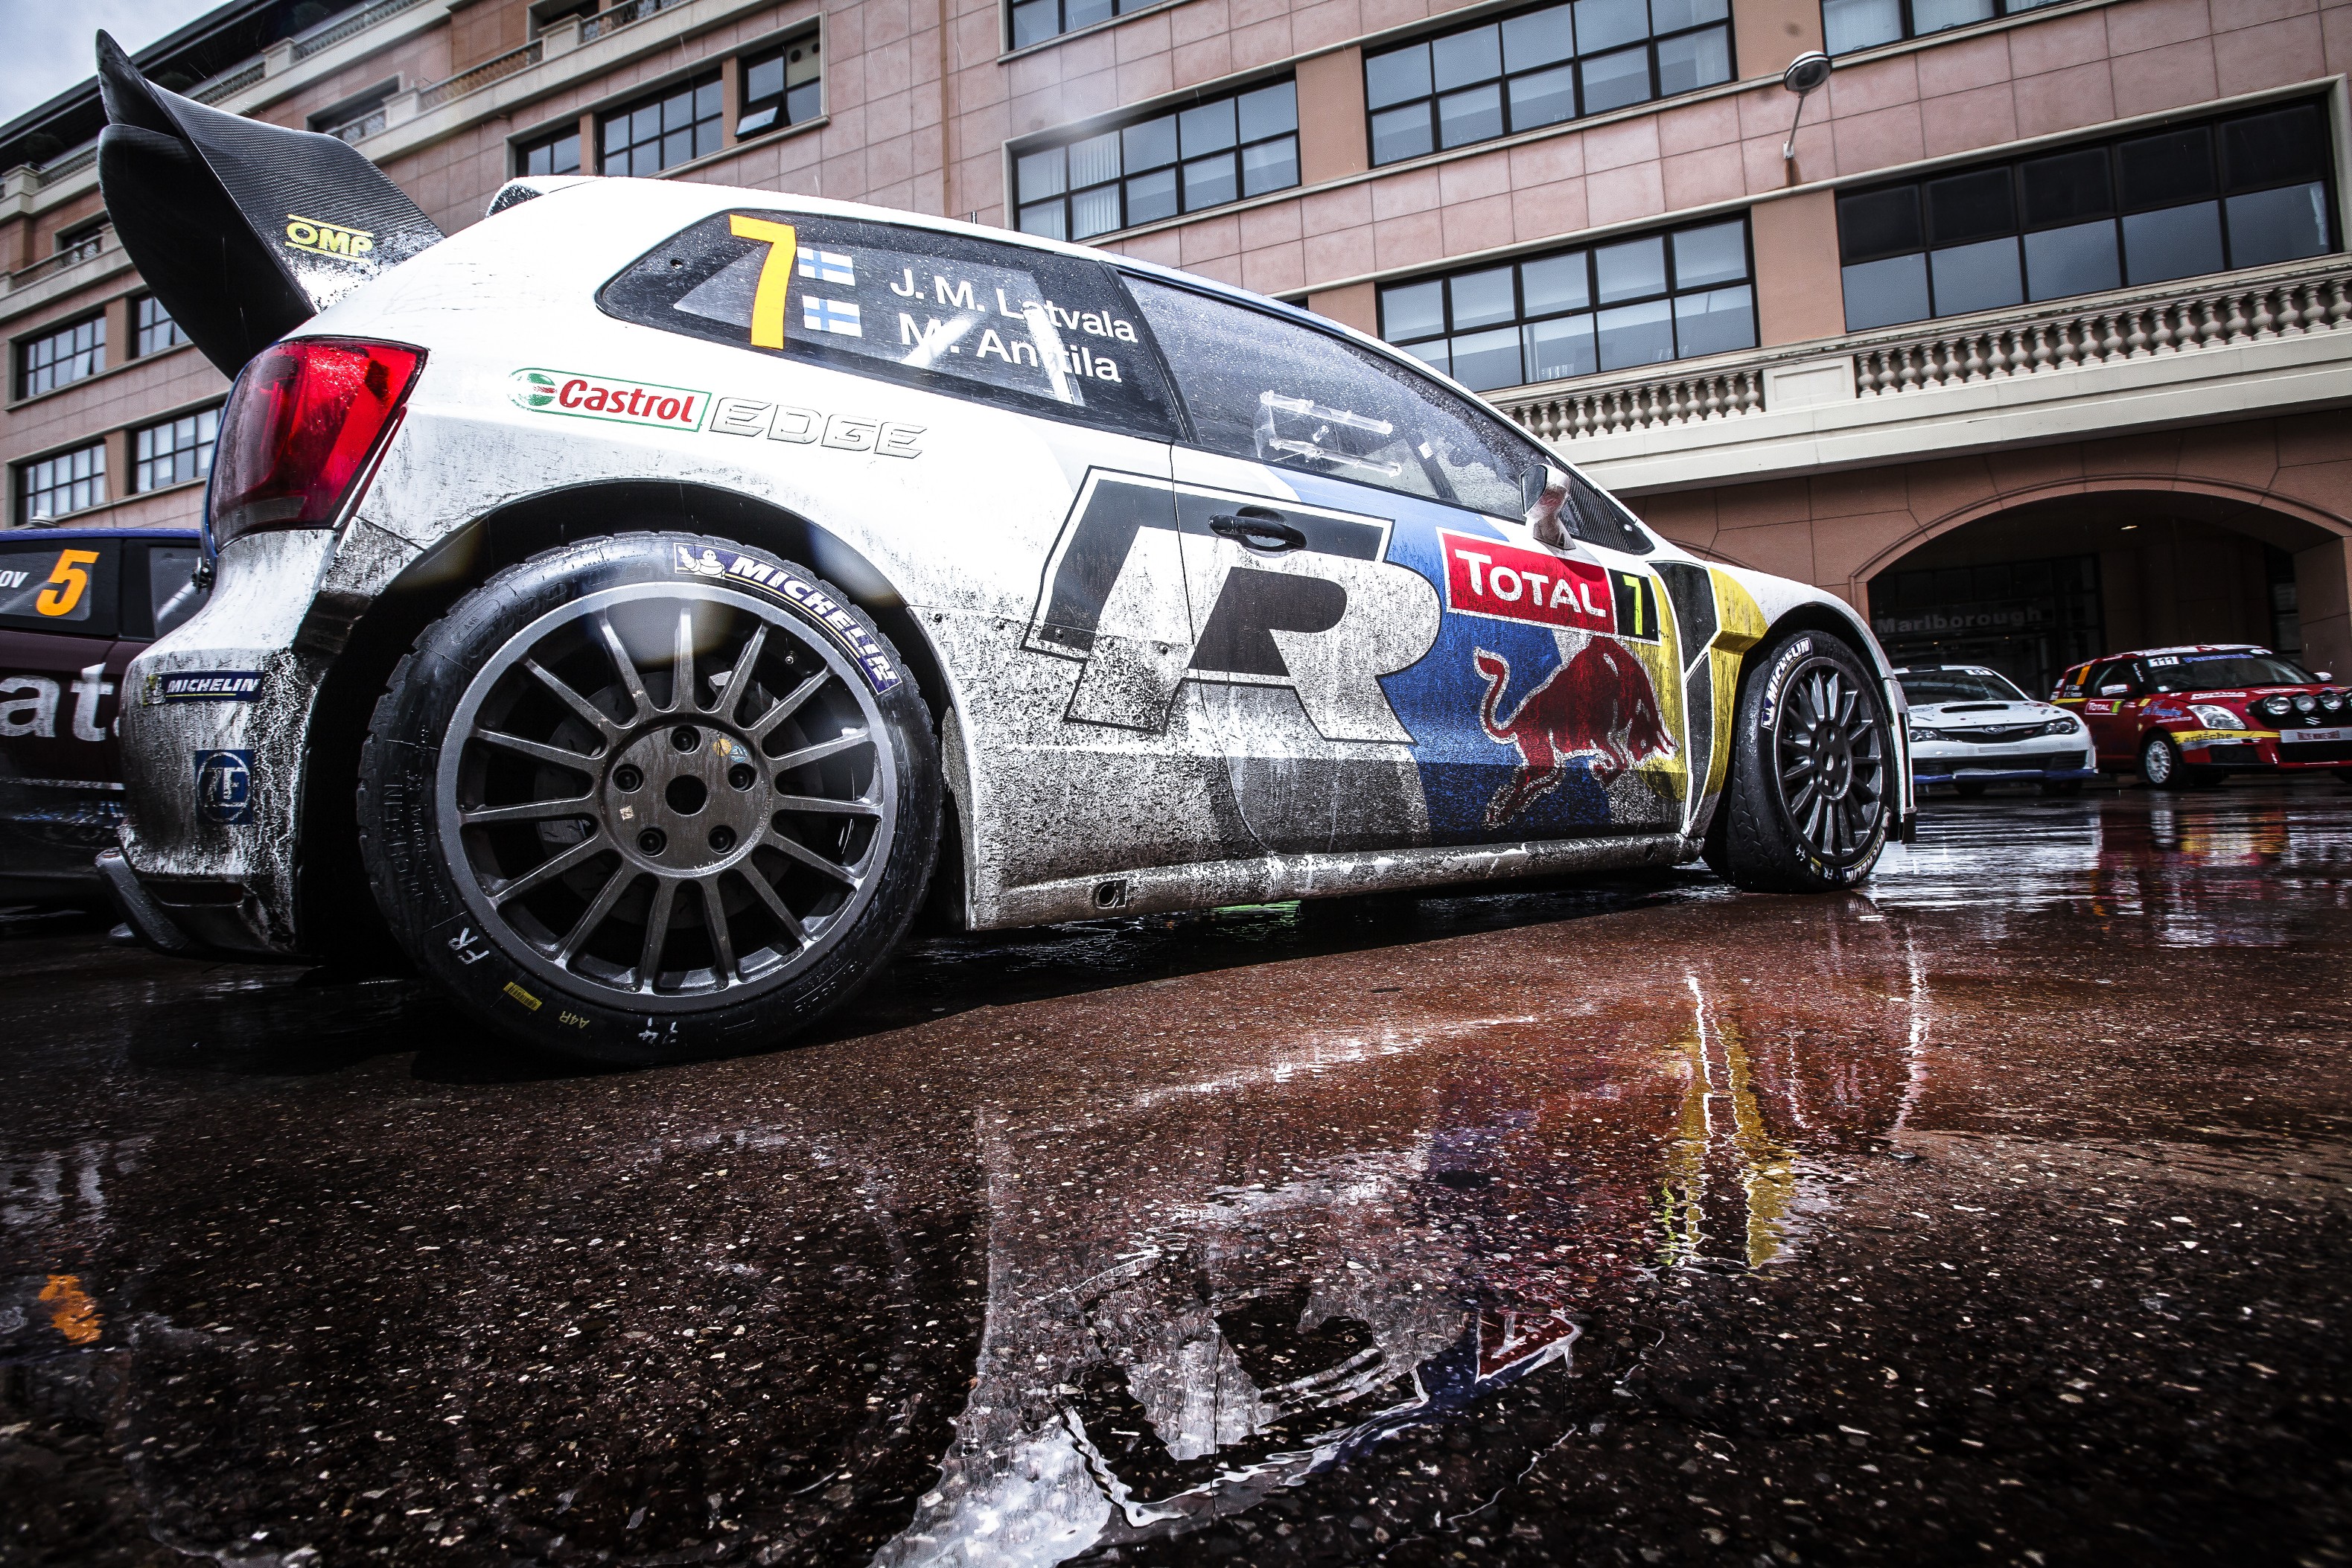 General 3159x2106 car Volkswagen rally cars reflection vehicle VW Polo WRC worm's eye view Volkswagen Polo race cars German cars Volkswagen Group car spoiler livery